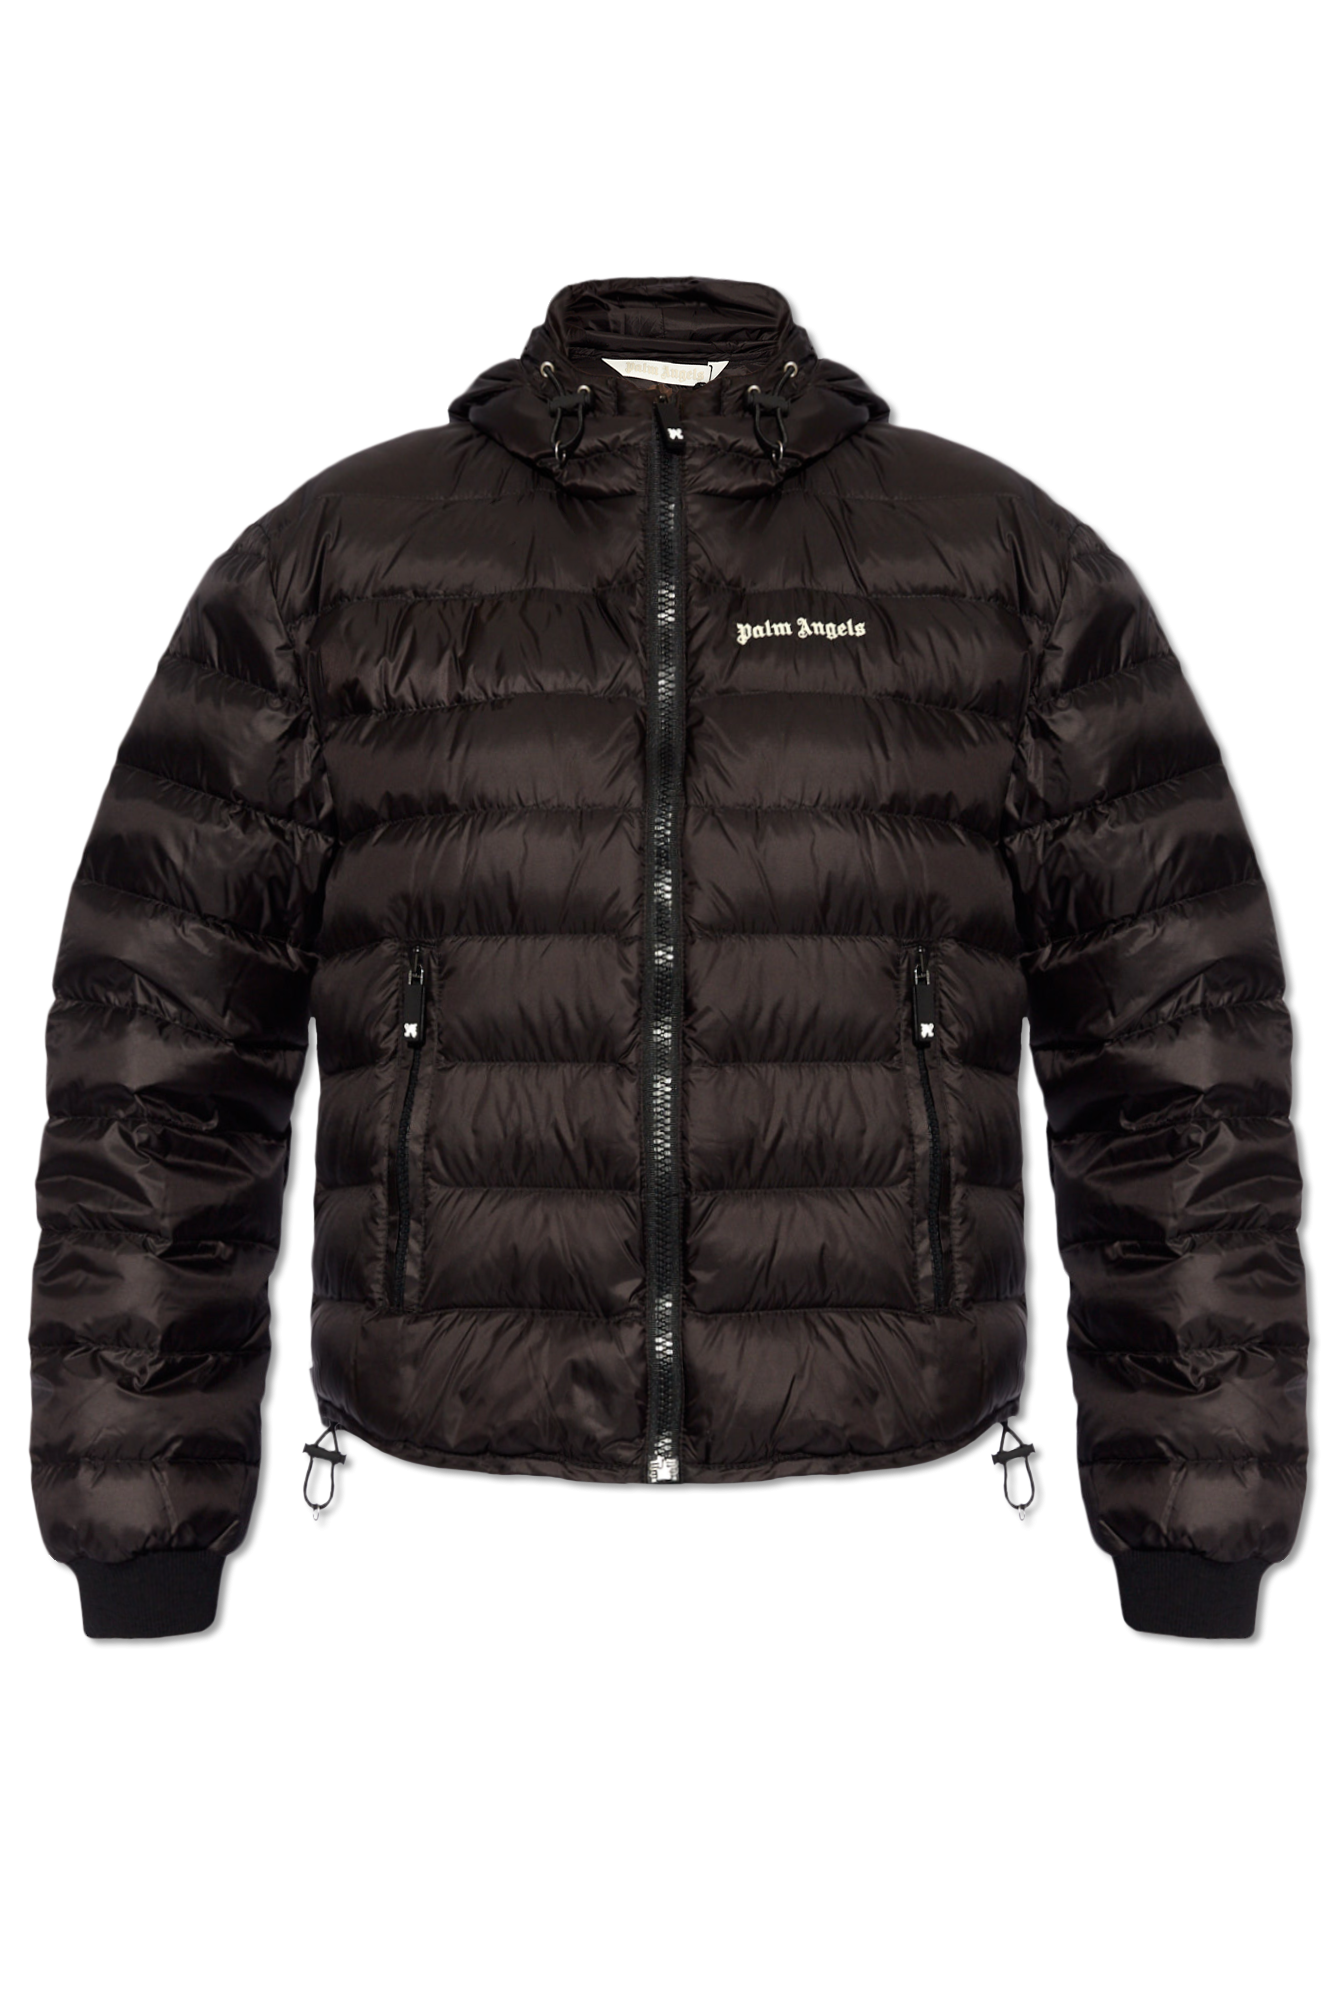 Palm Angels Parajumpers Dream puffer jacket